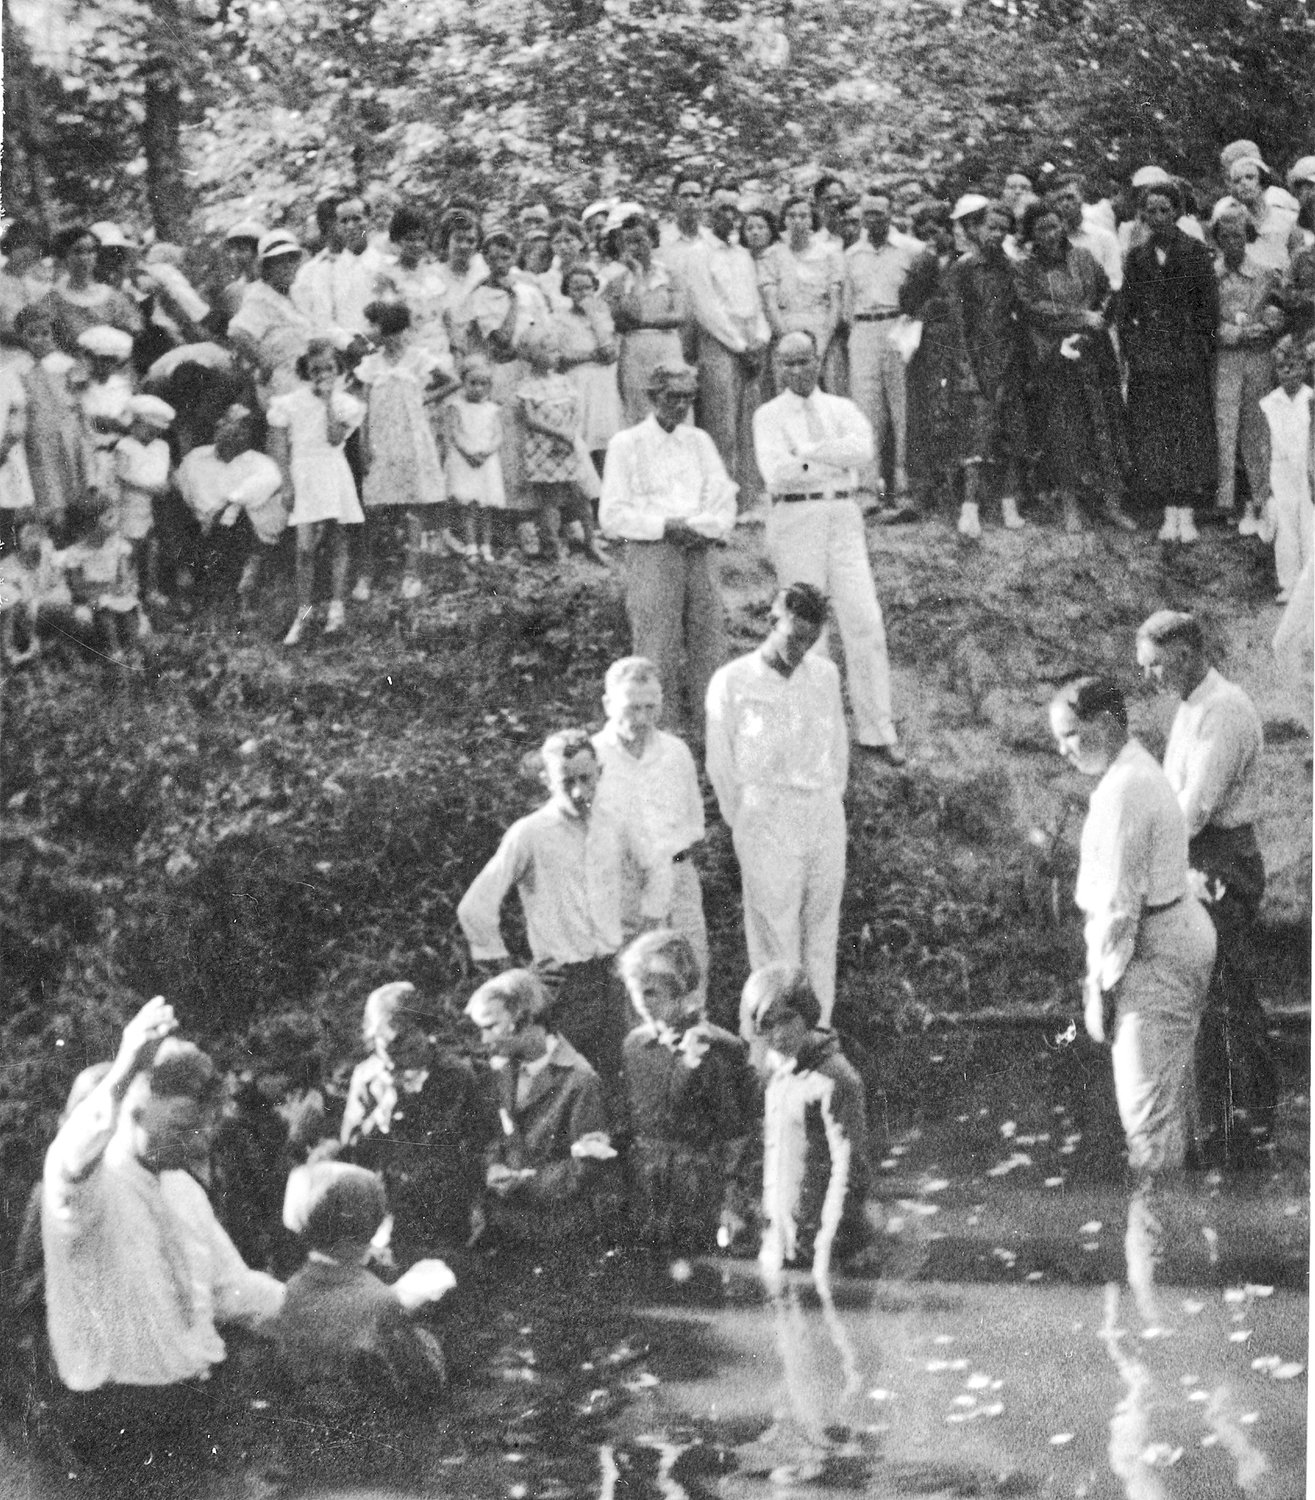 The photograph “Baptism near Mineola - Summer 1935” is provided courtesy of the Library of Congress.